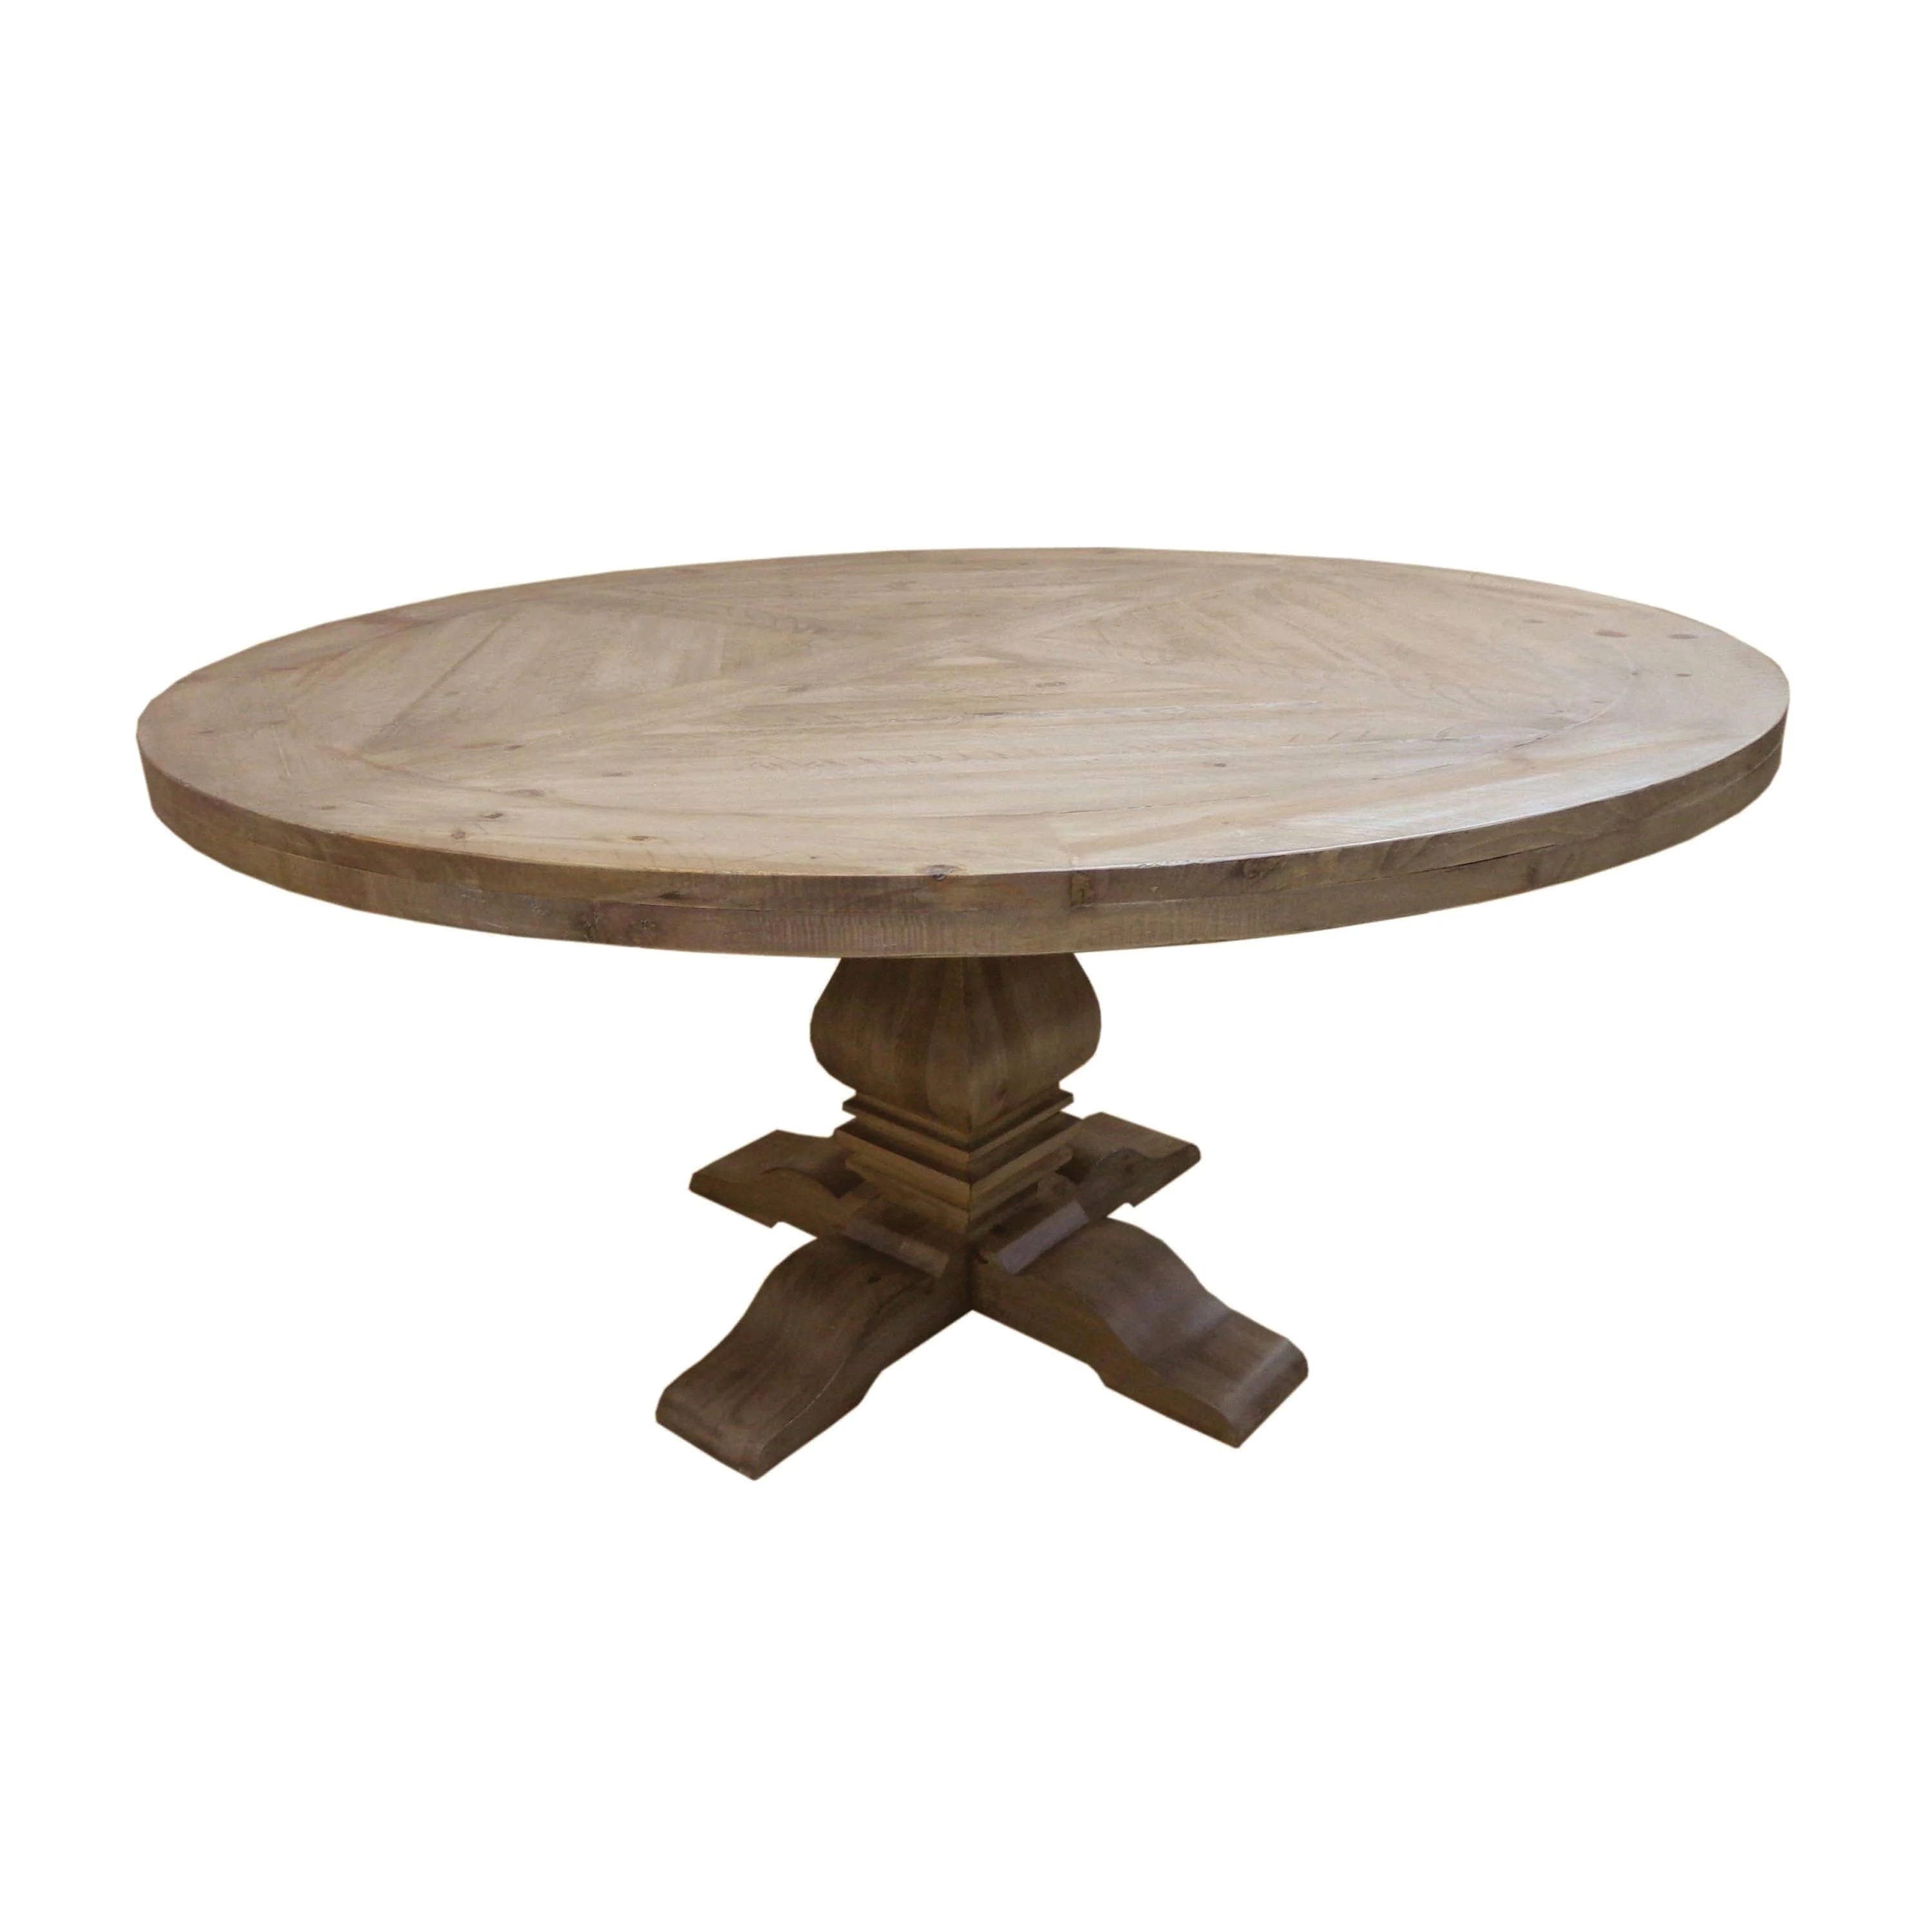 Rustic Smoke Round Dining Table with Barrel-Back Chairs | Image